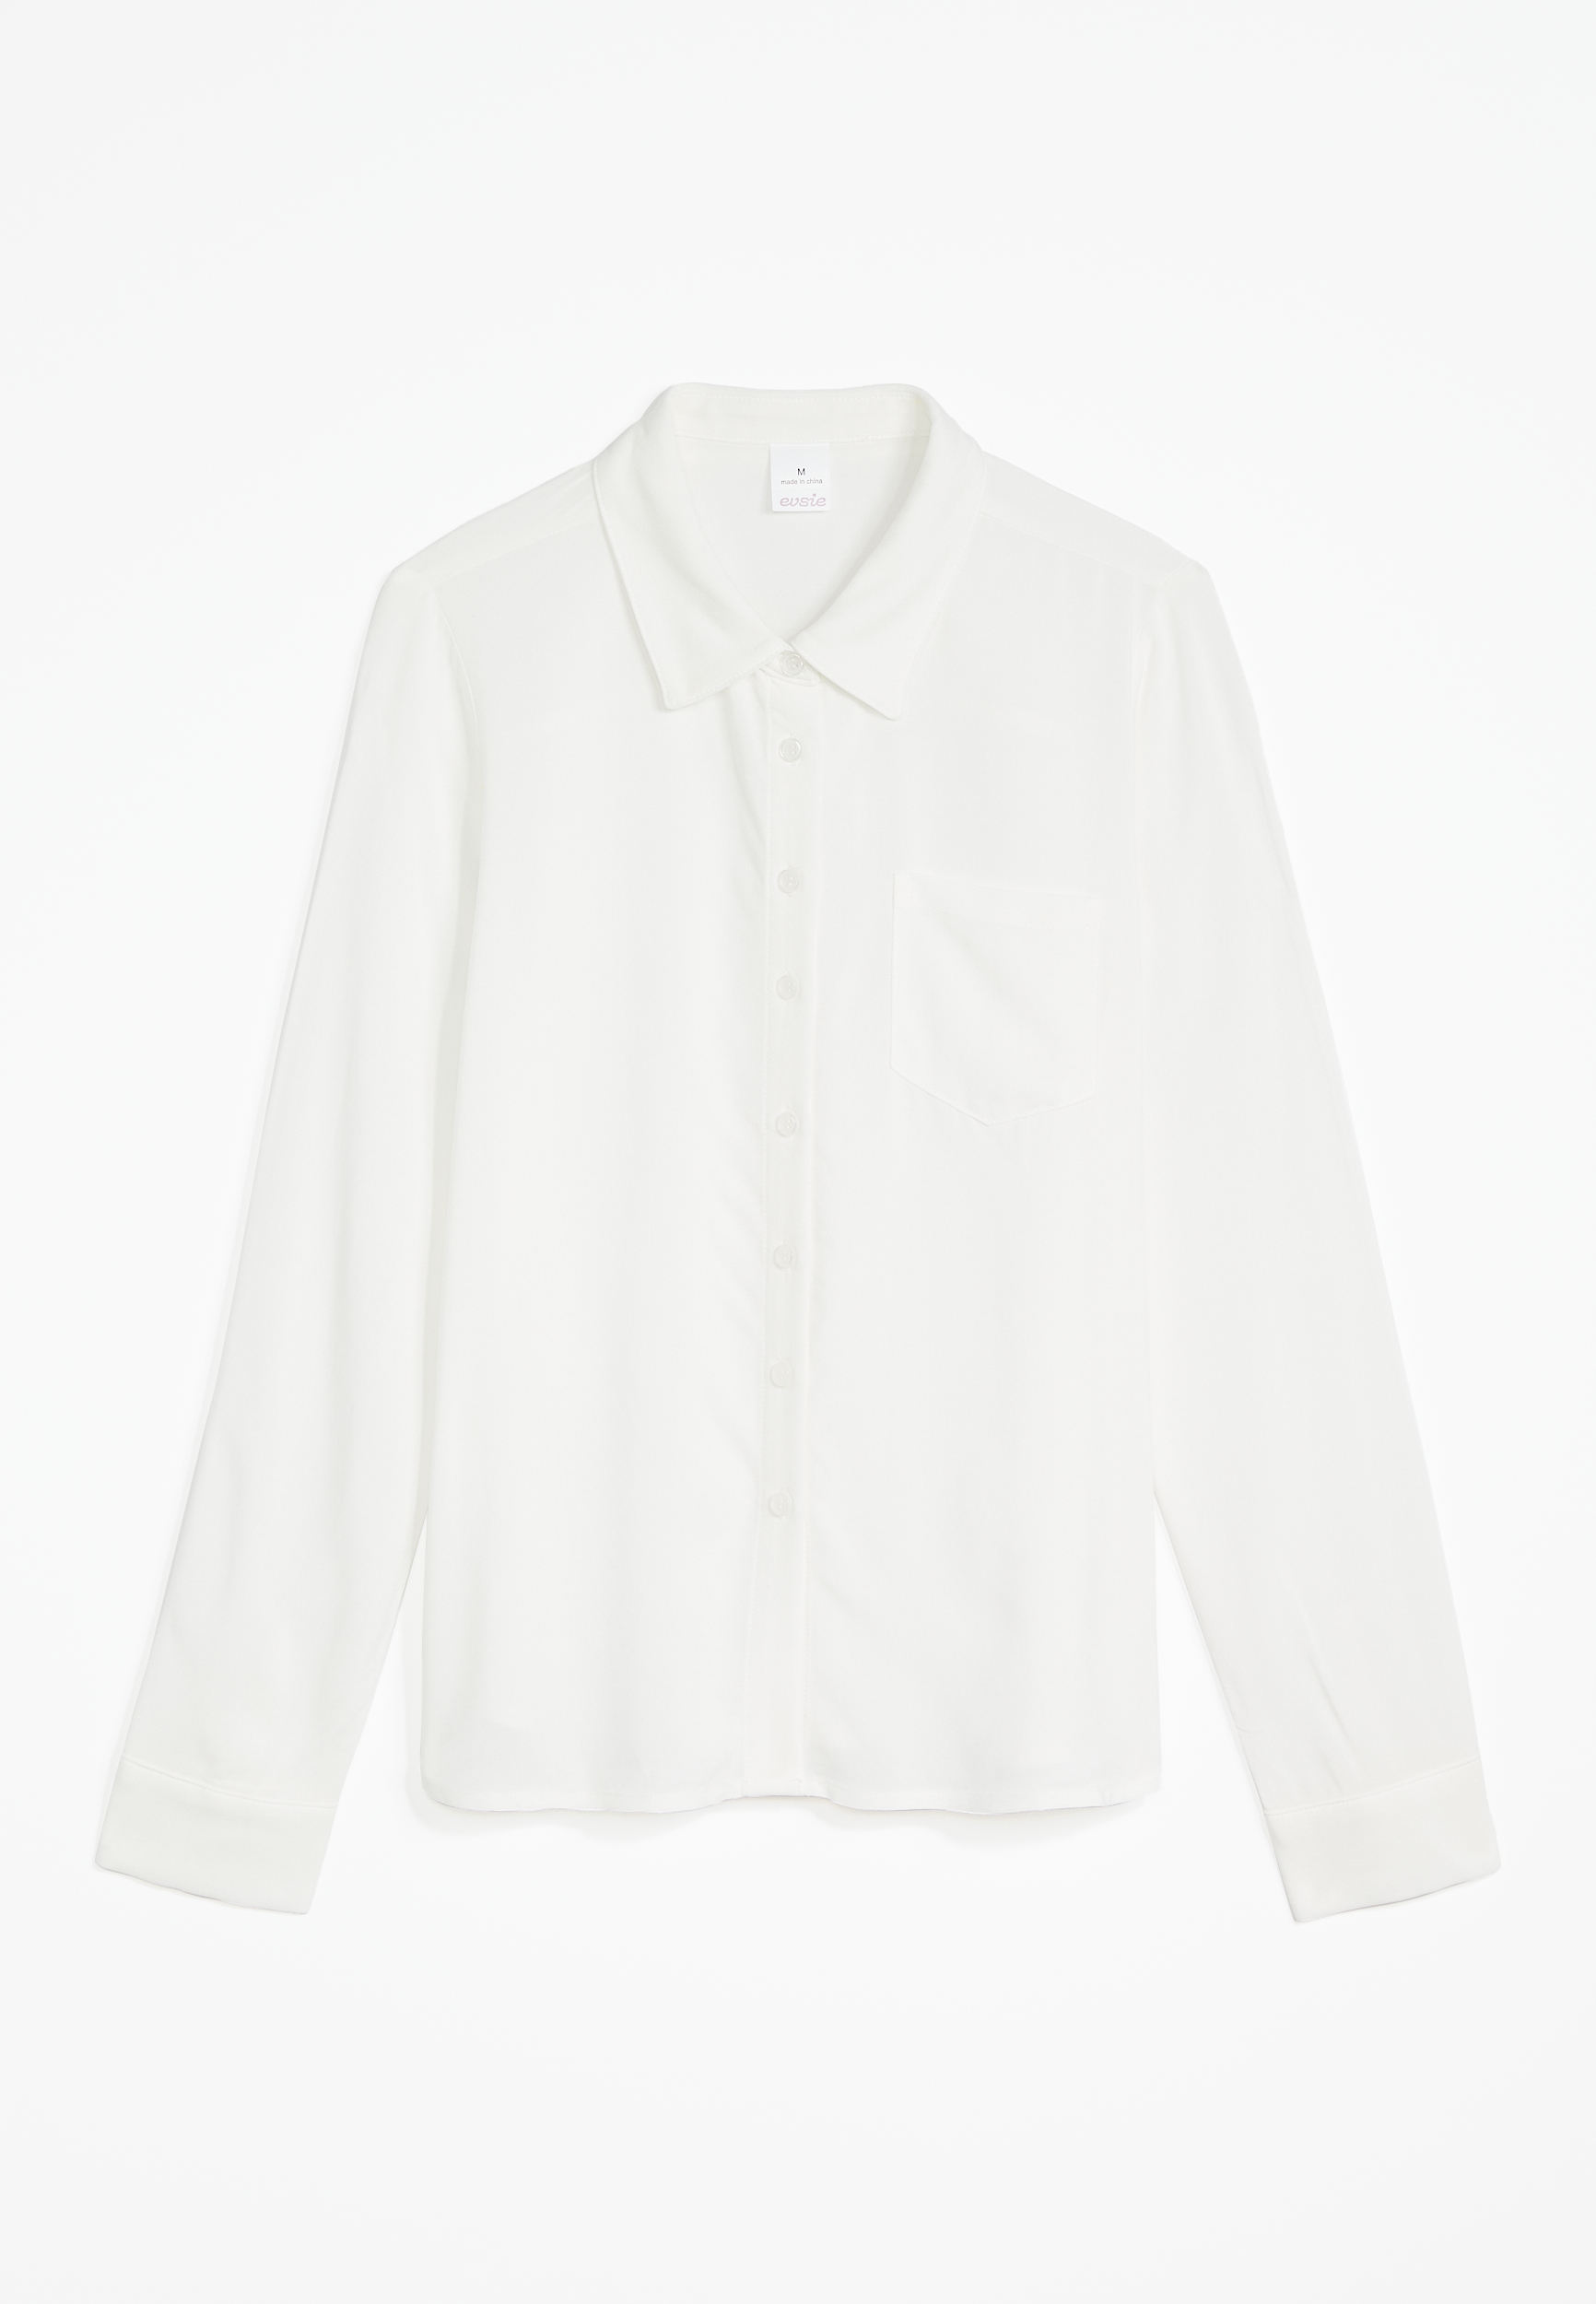 Girls Long Sleeves Button Down Shirt | maurices